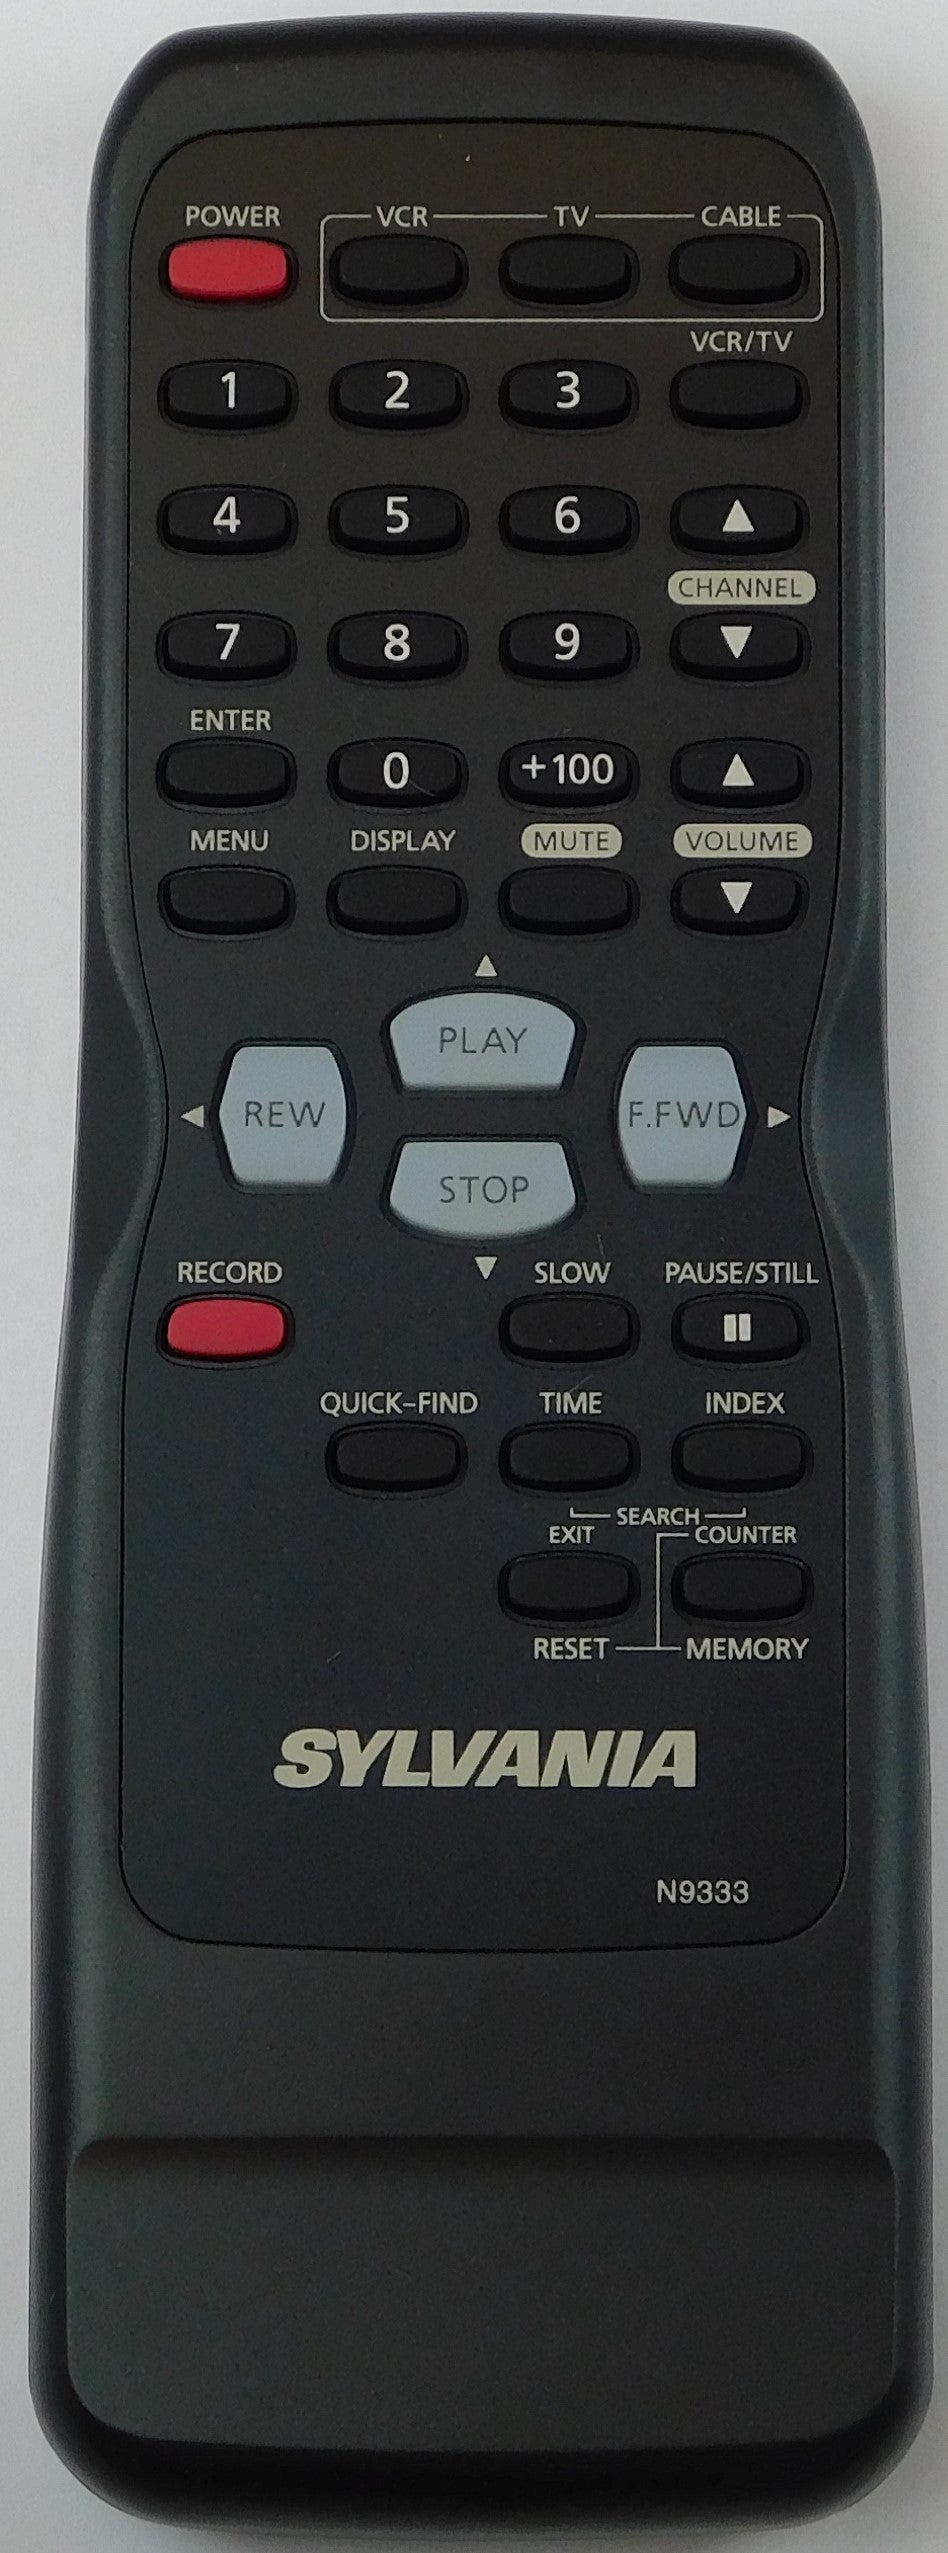 OEM replacement remote control for Sylvania VCRs N9333UD